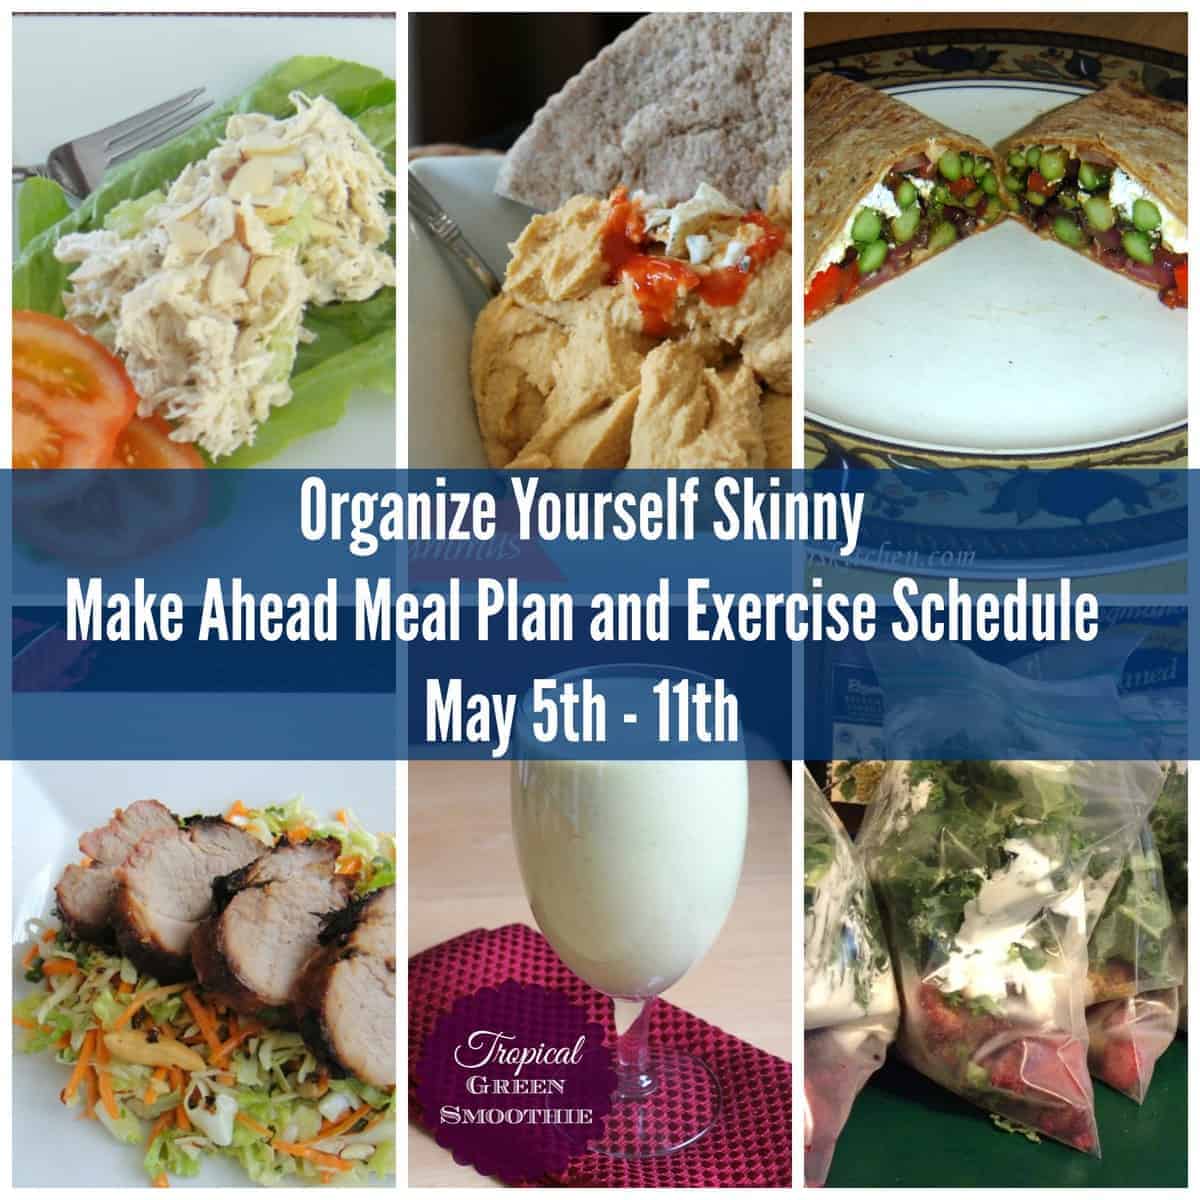 Organize Yourself Skinny Make Ahead Meal Plan and Exercise Schedule